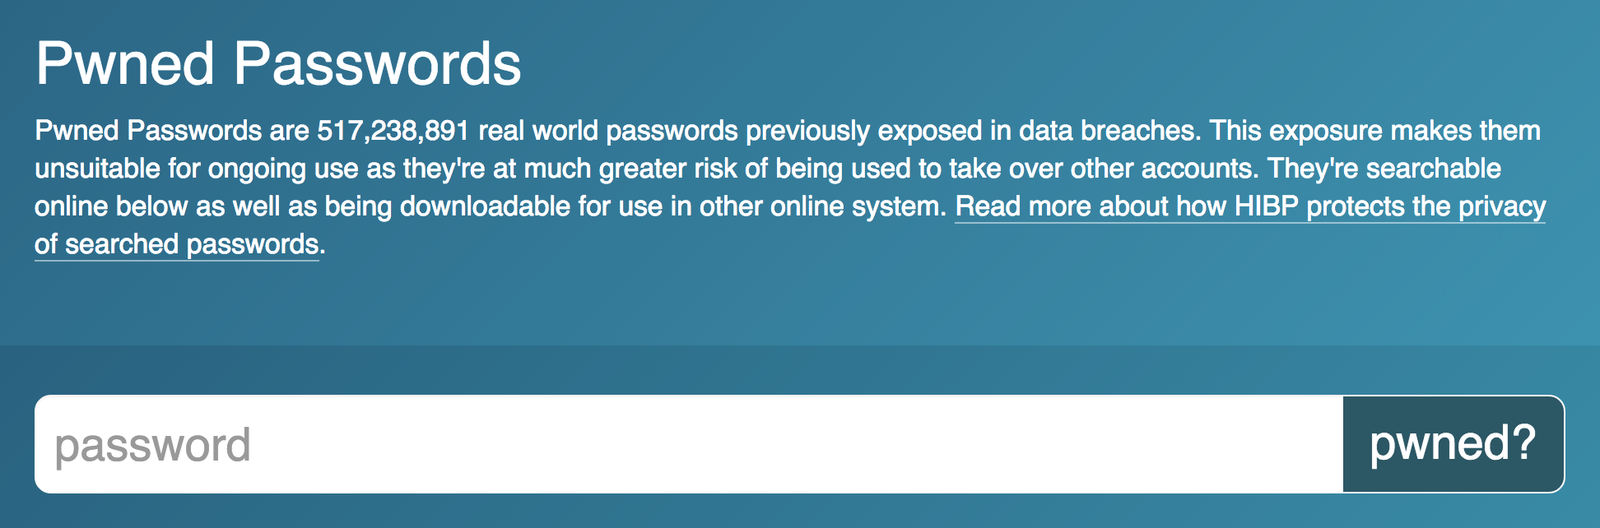 World password. Have i been pwned. Check password. Why your password is. Previous password.